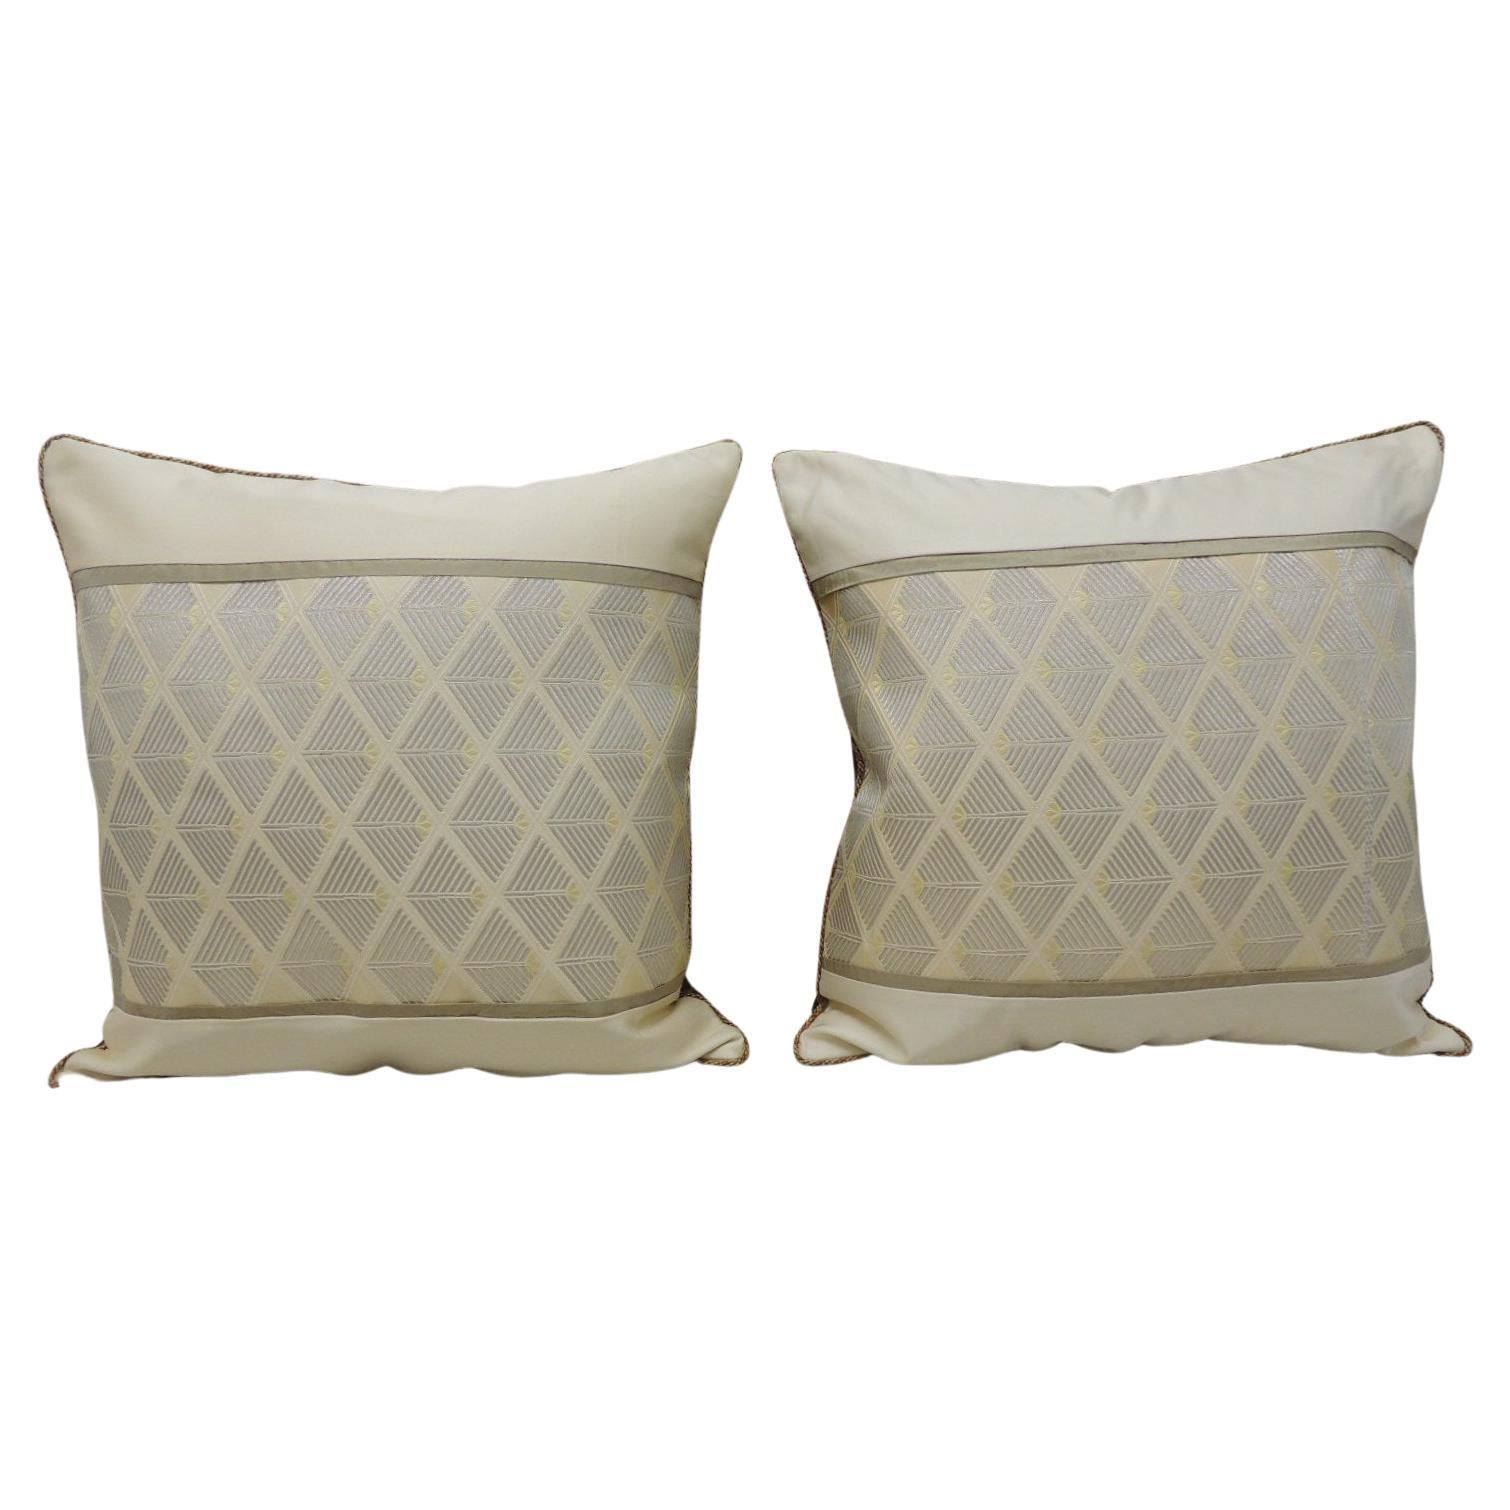 Pair of Vintage Woven Silk Gold and Silver Obi Square Decorative Pillows